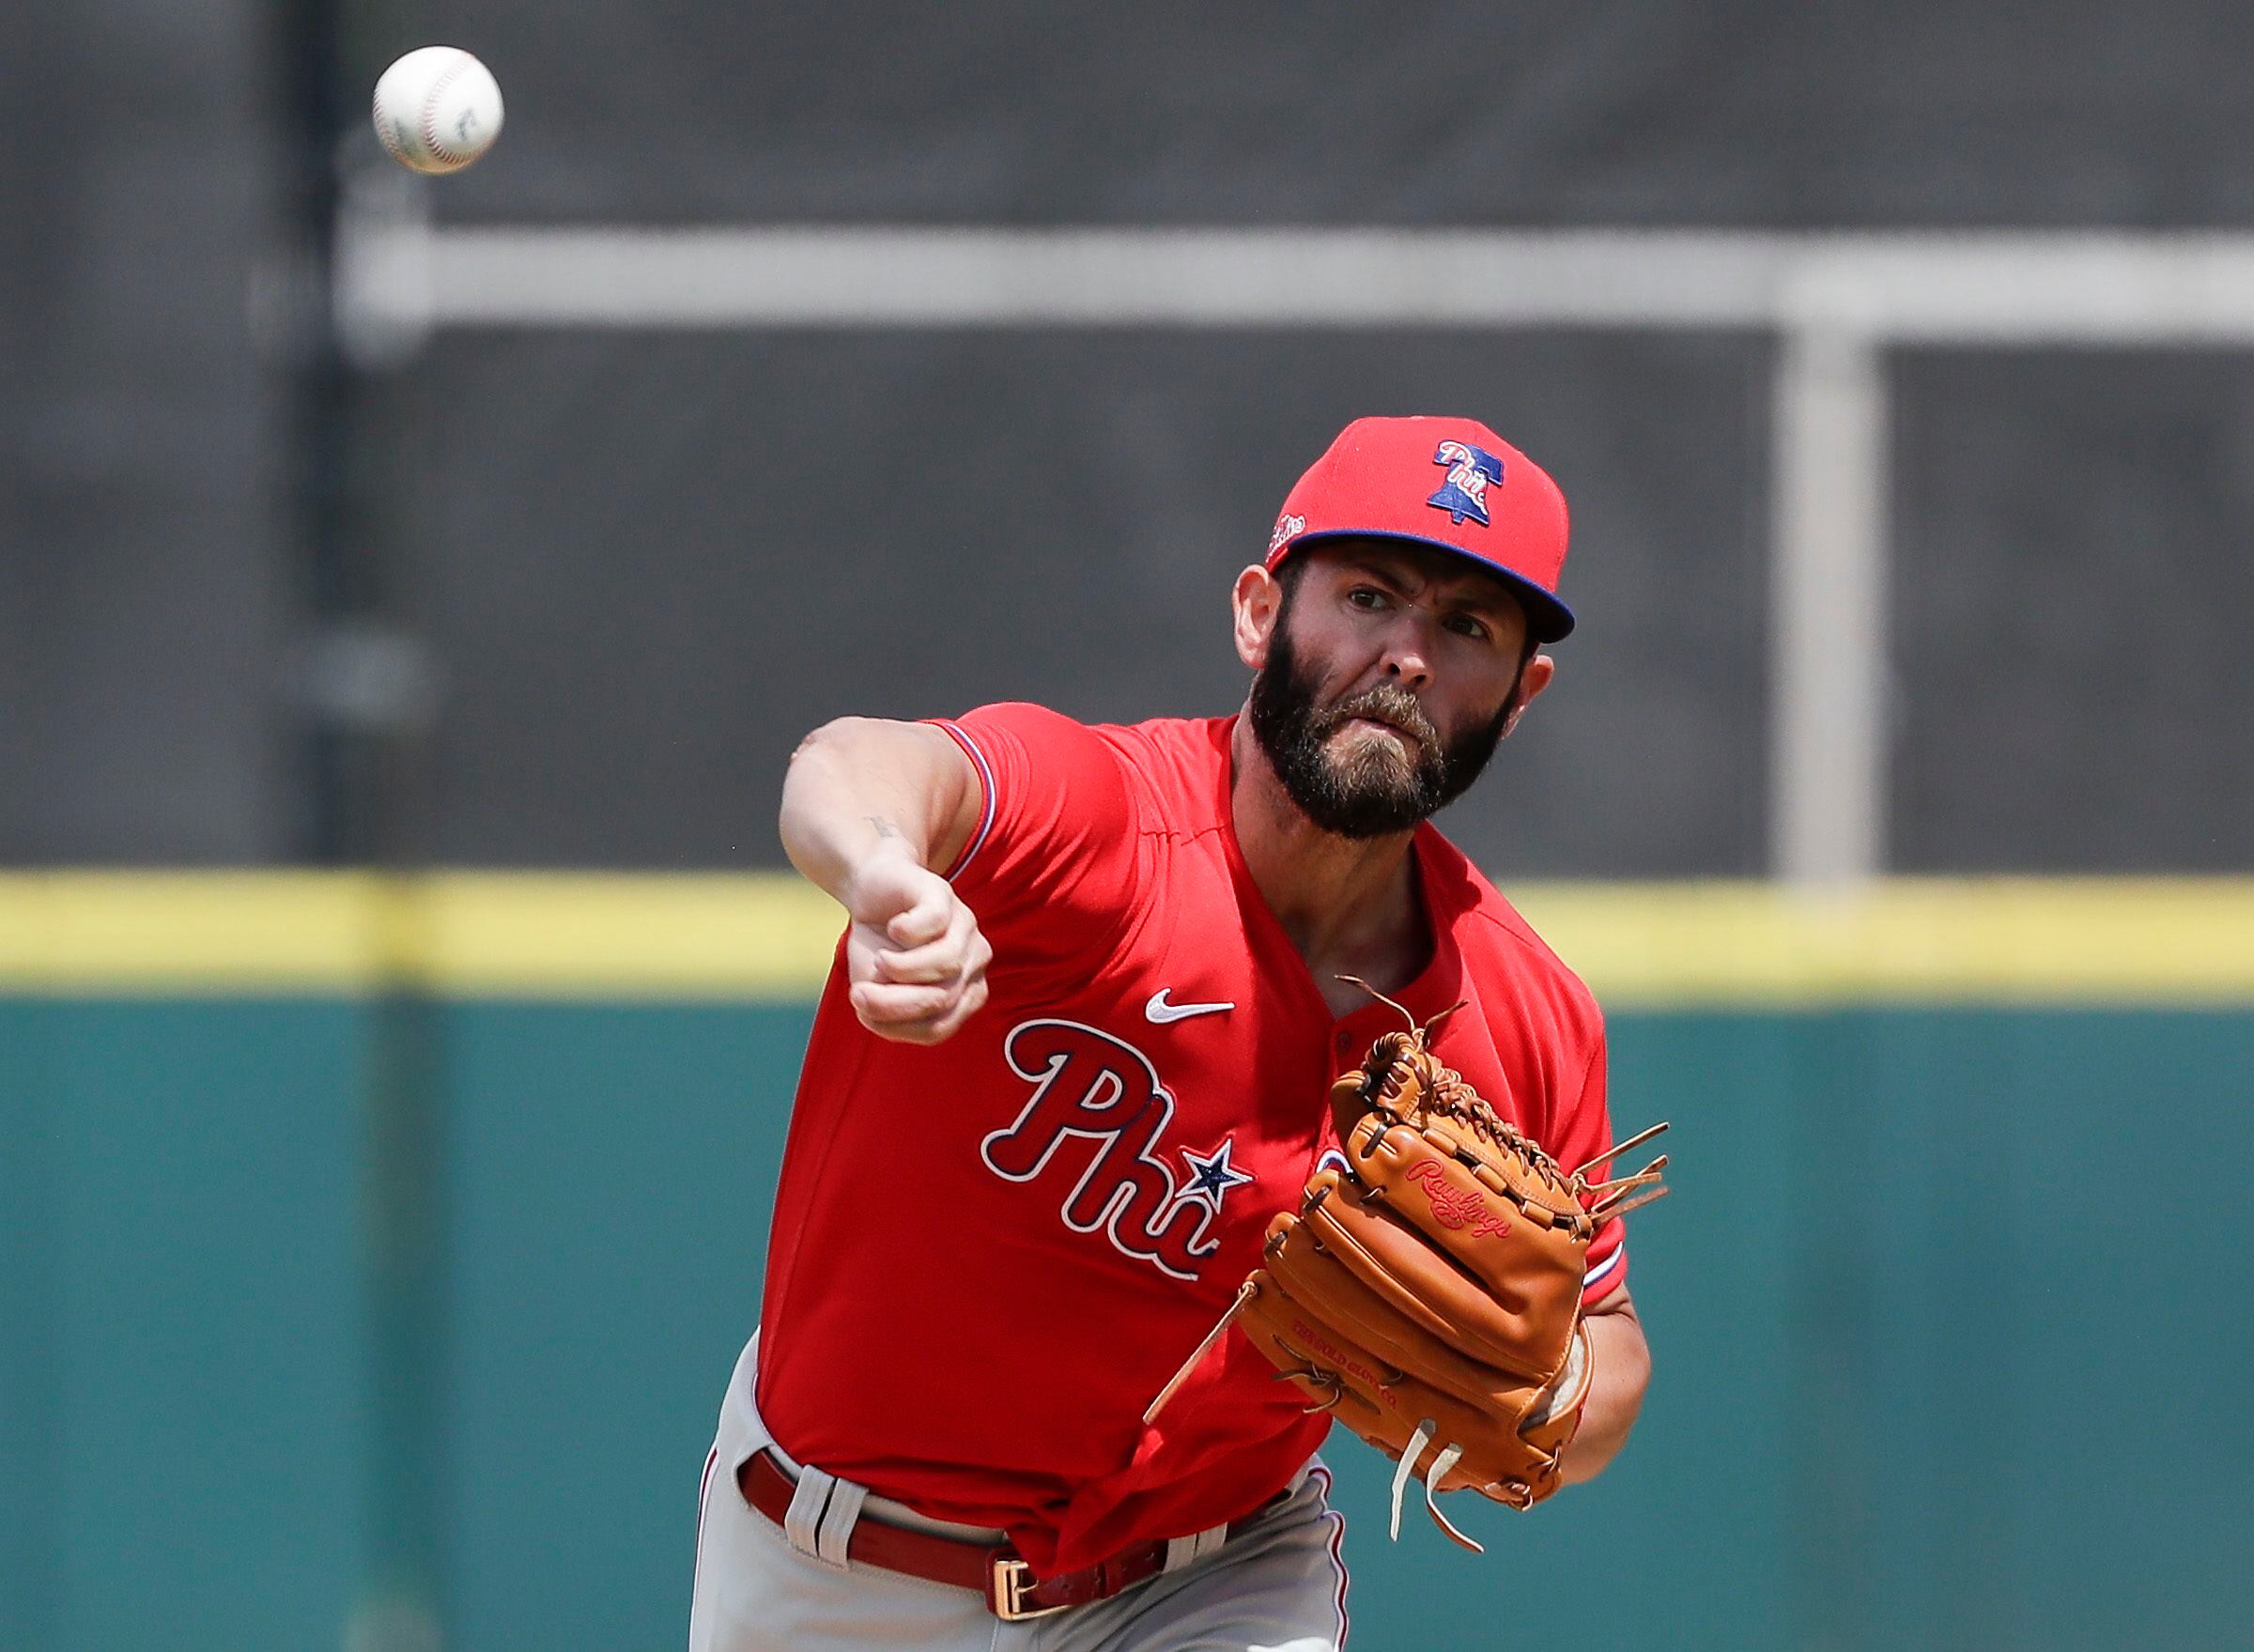 Phillies starter Jake Arrieta is struggling to strike hitters out